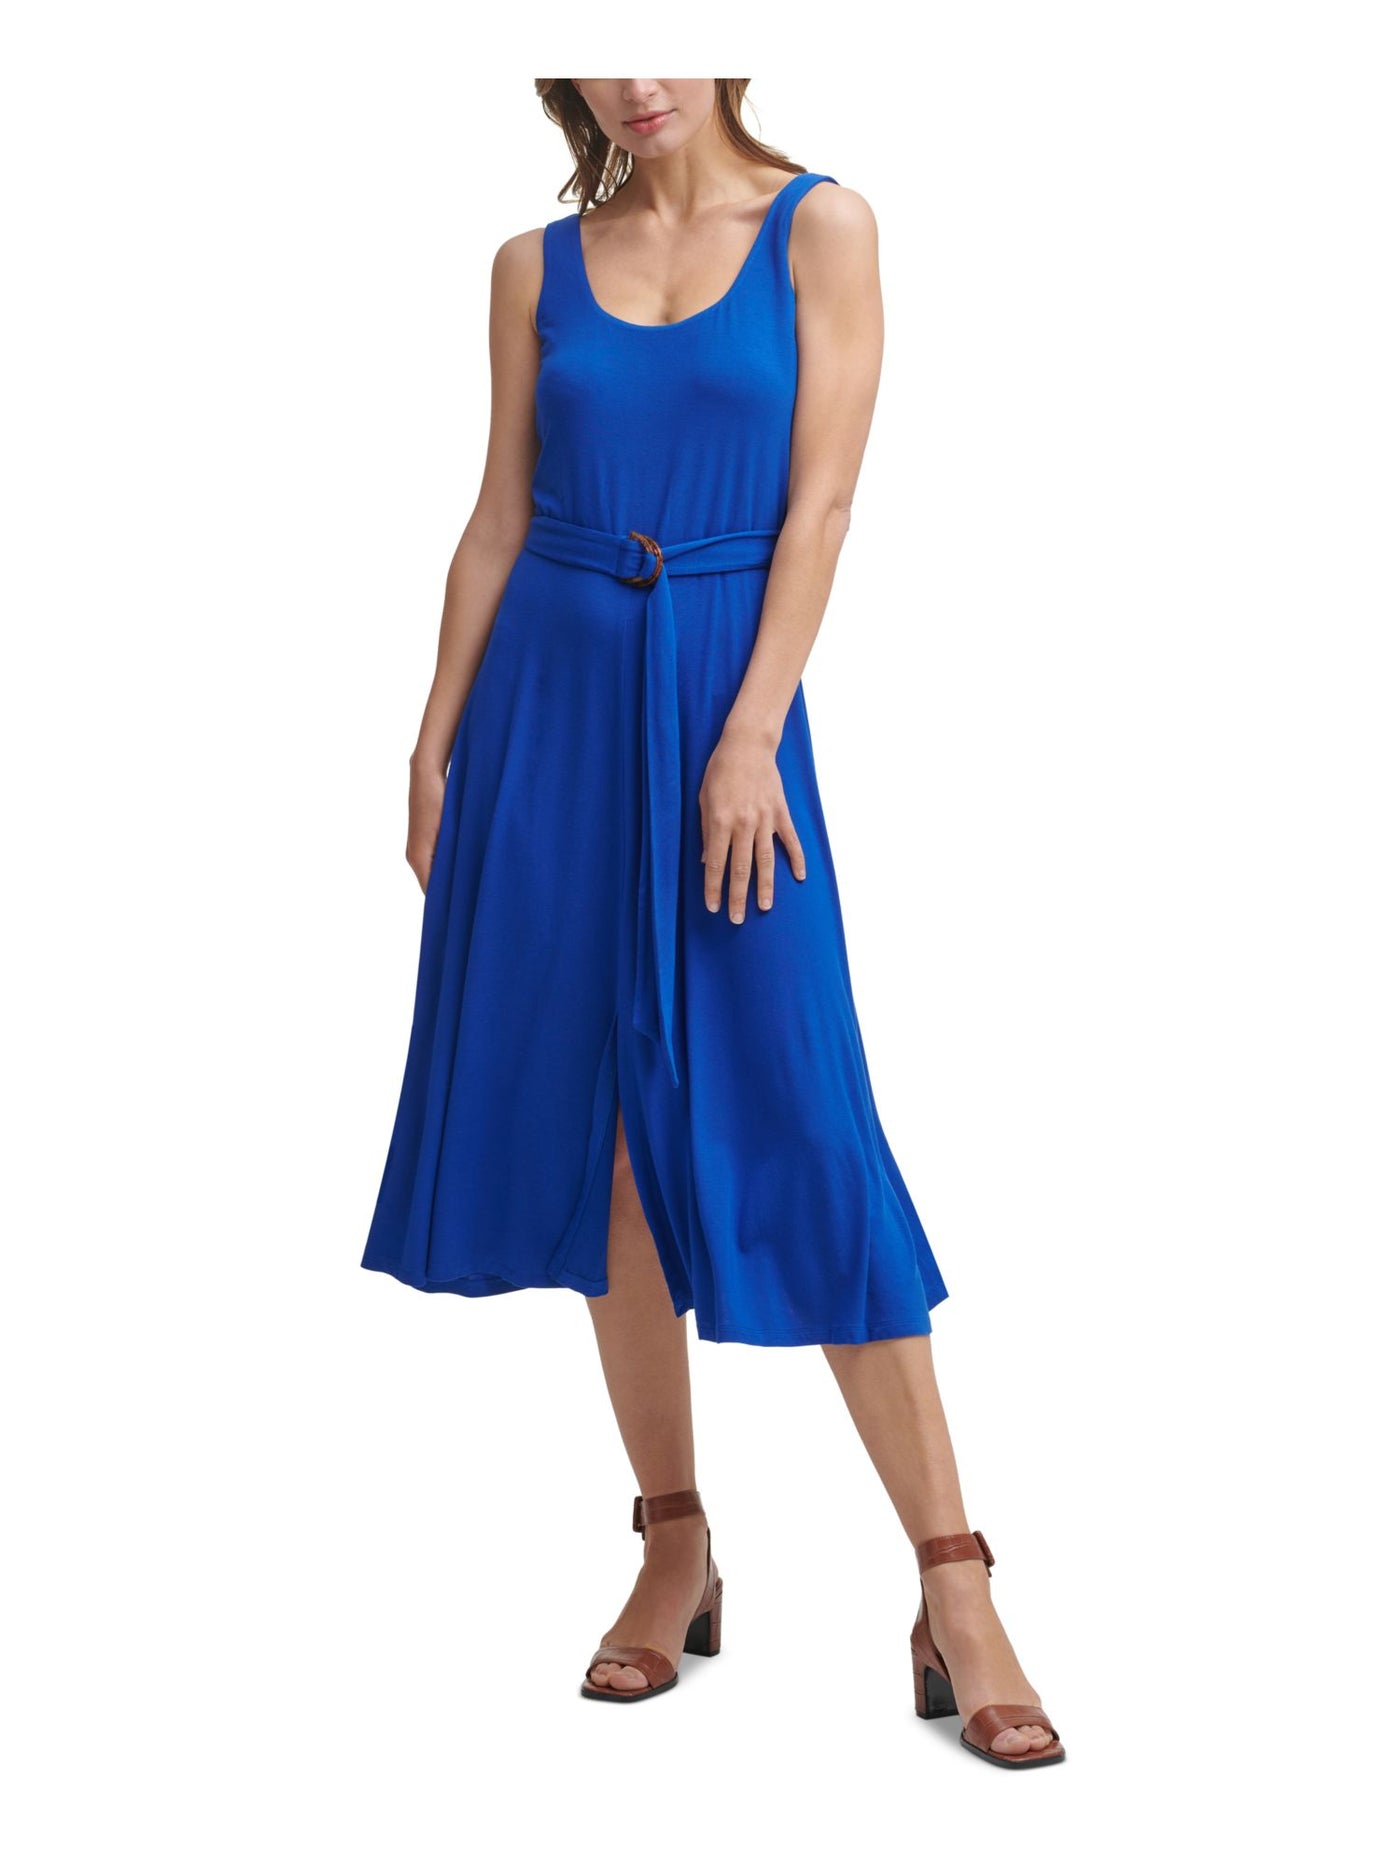 CALVIN KLEIN Womens Blue Jersey Belted Slitted Sleeveless Scoop Neck Midi Fit + Flare Dress 10